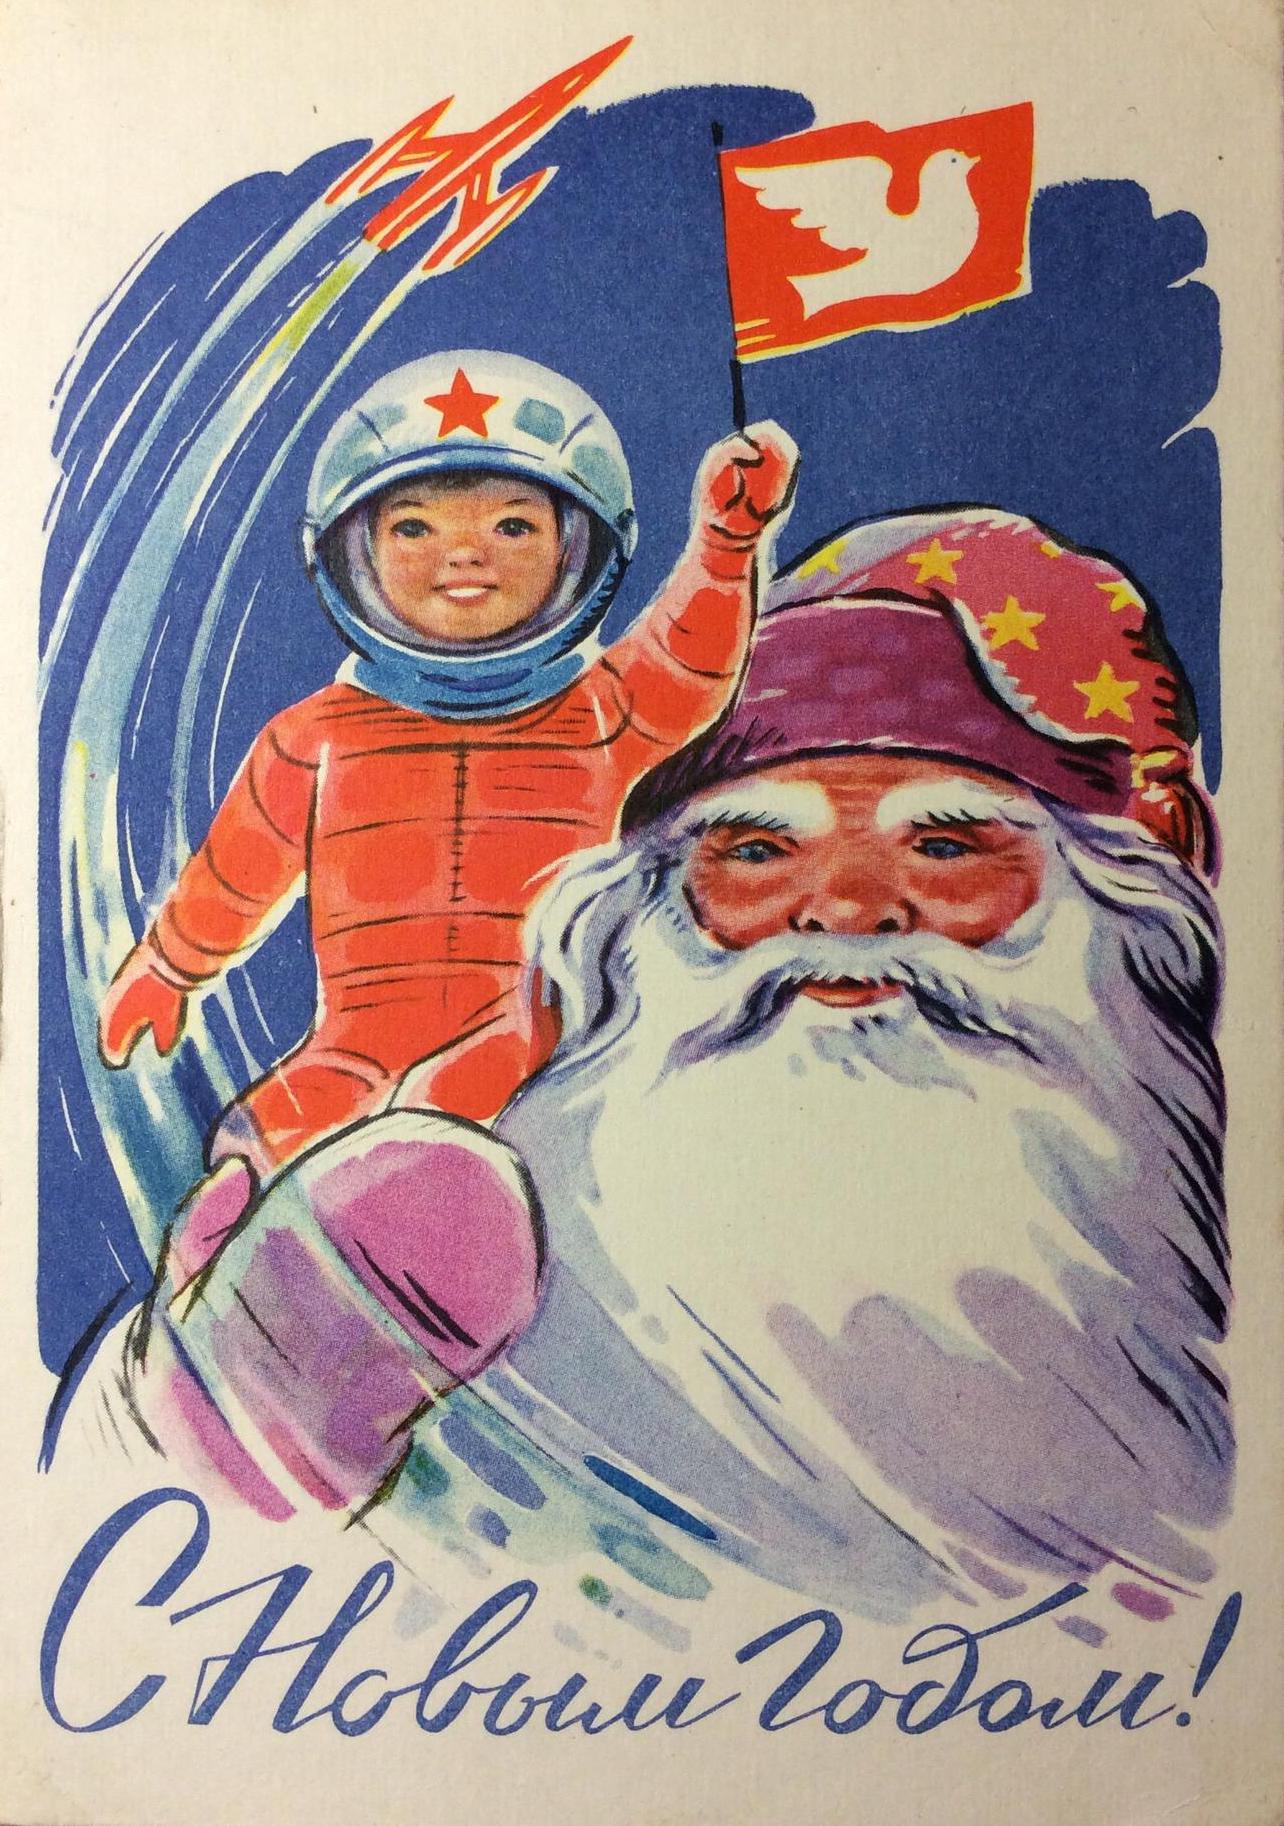 A 1962 New Year's card shows Ded Moroz holding a boy who waves a communist flag (PostcardWatch USSR/Etsy.com)